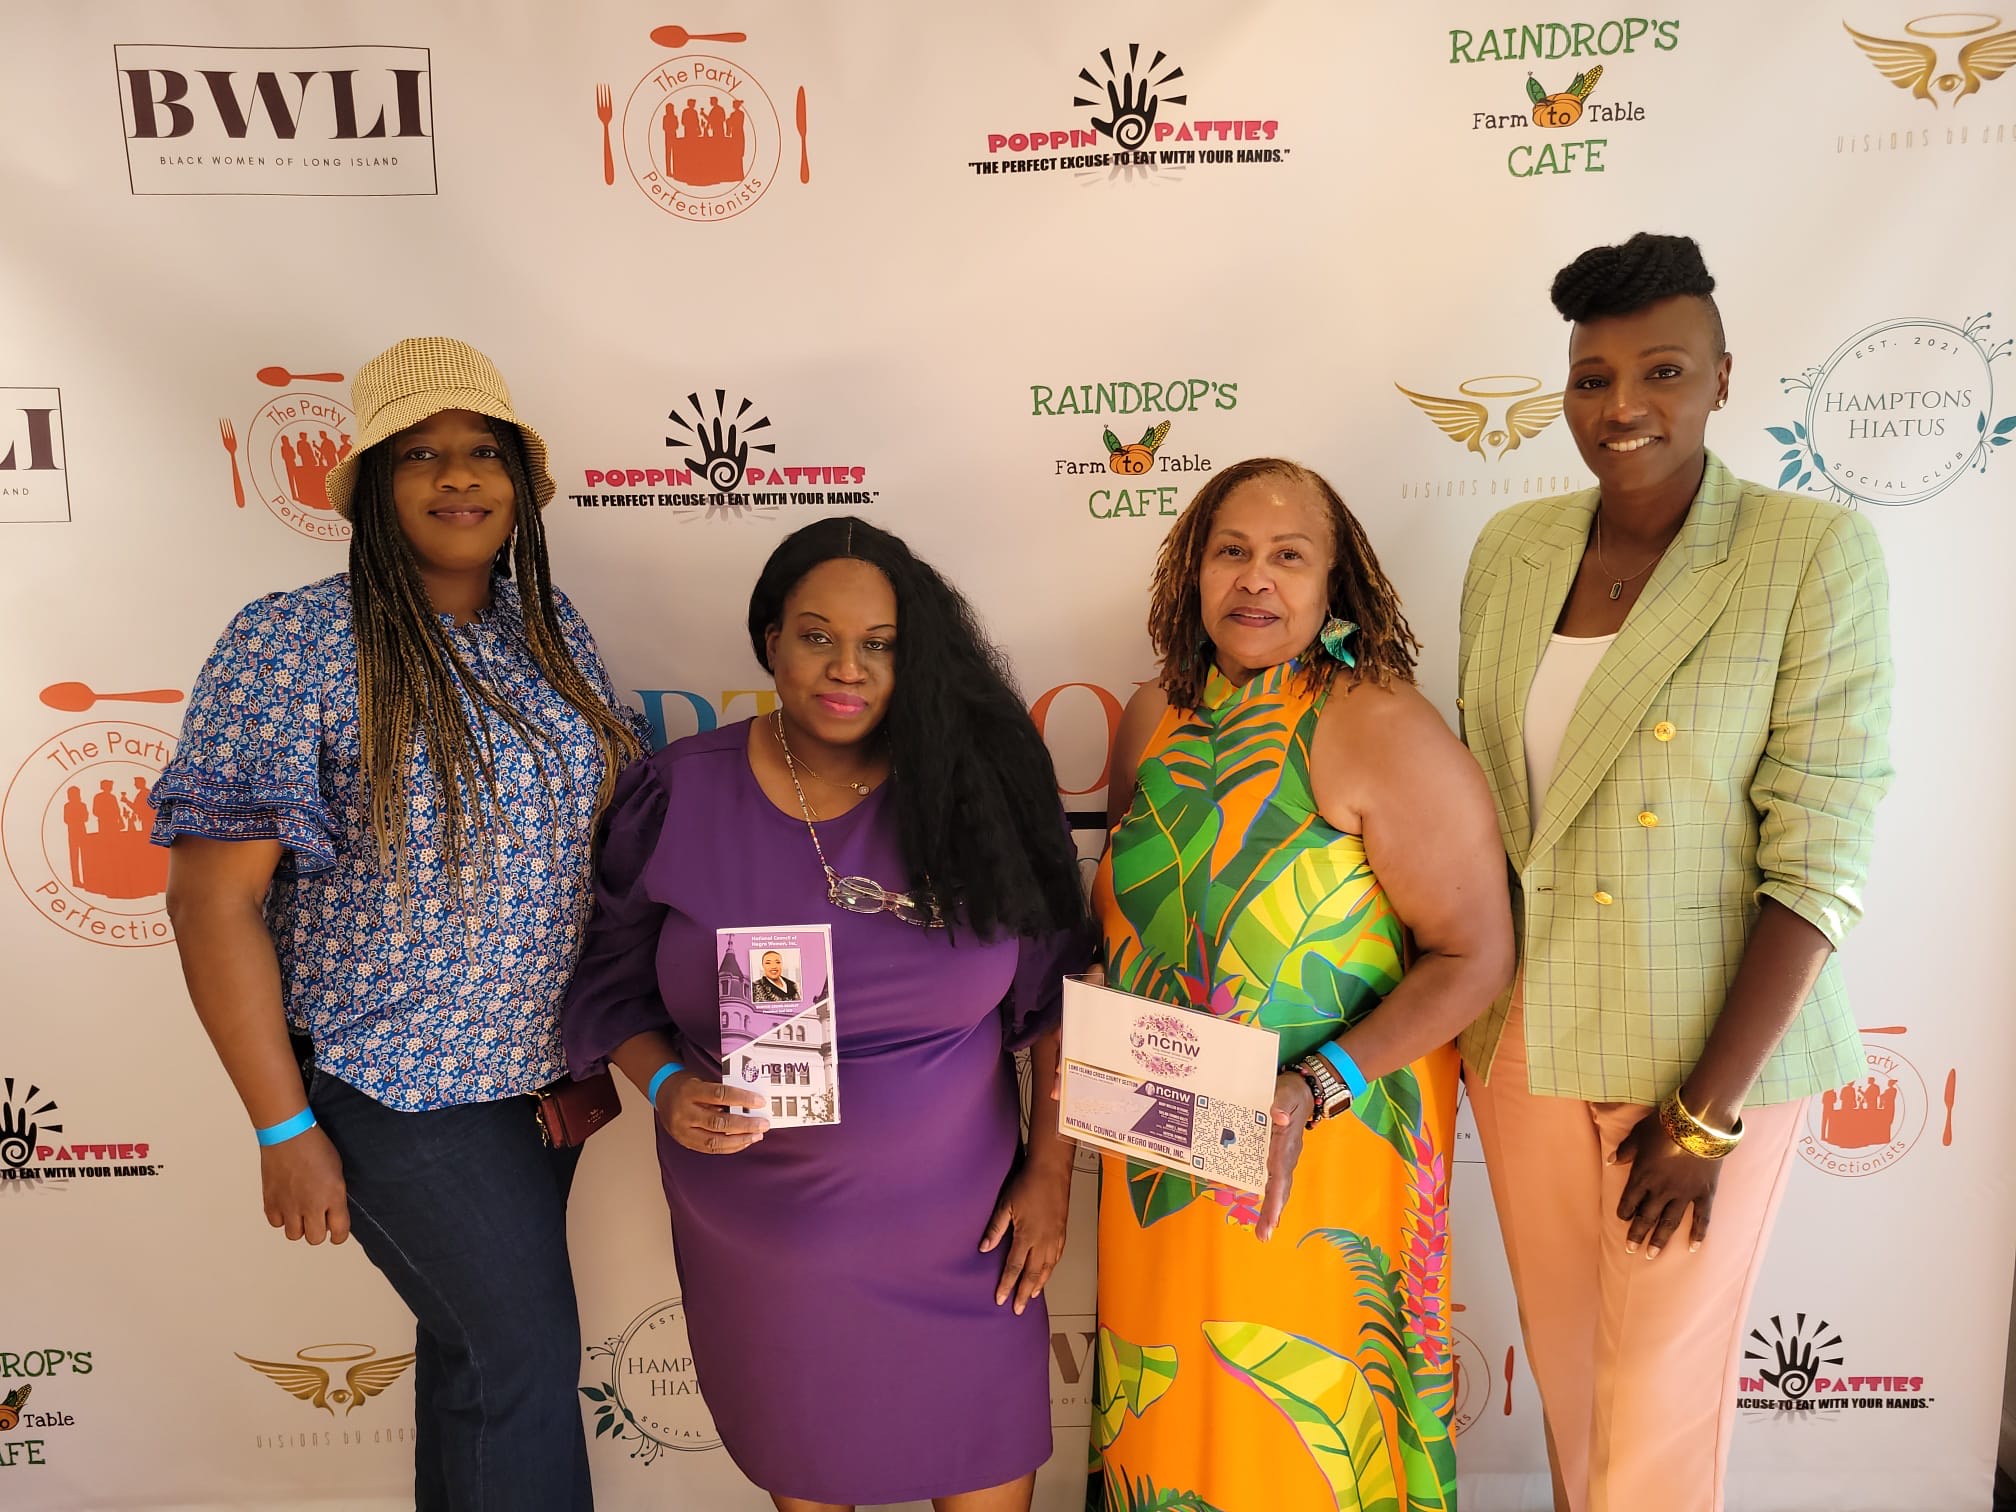 Some members of NCNW Long Island Cross County pictured here attending ART & SOUL: Hamptons